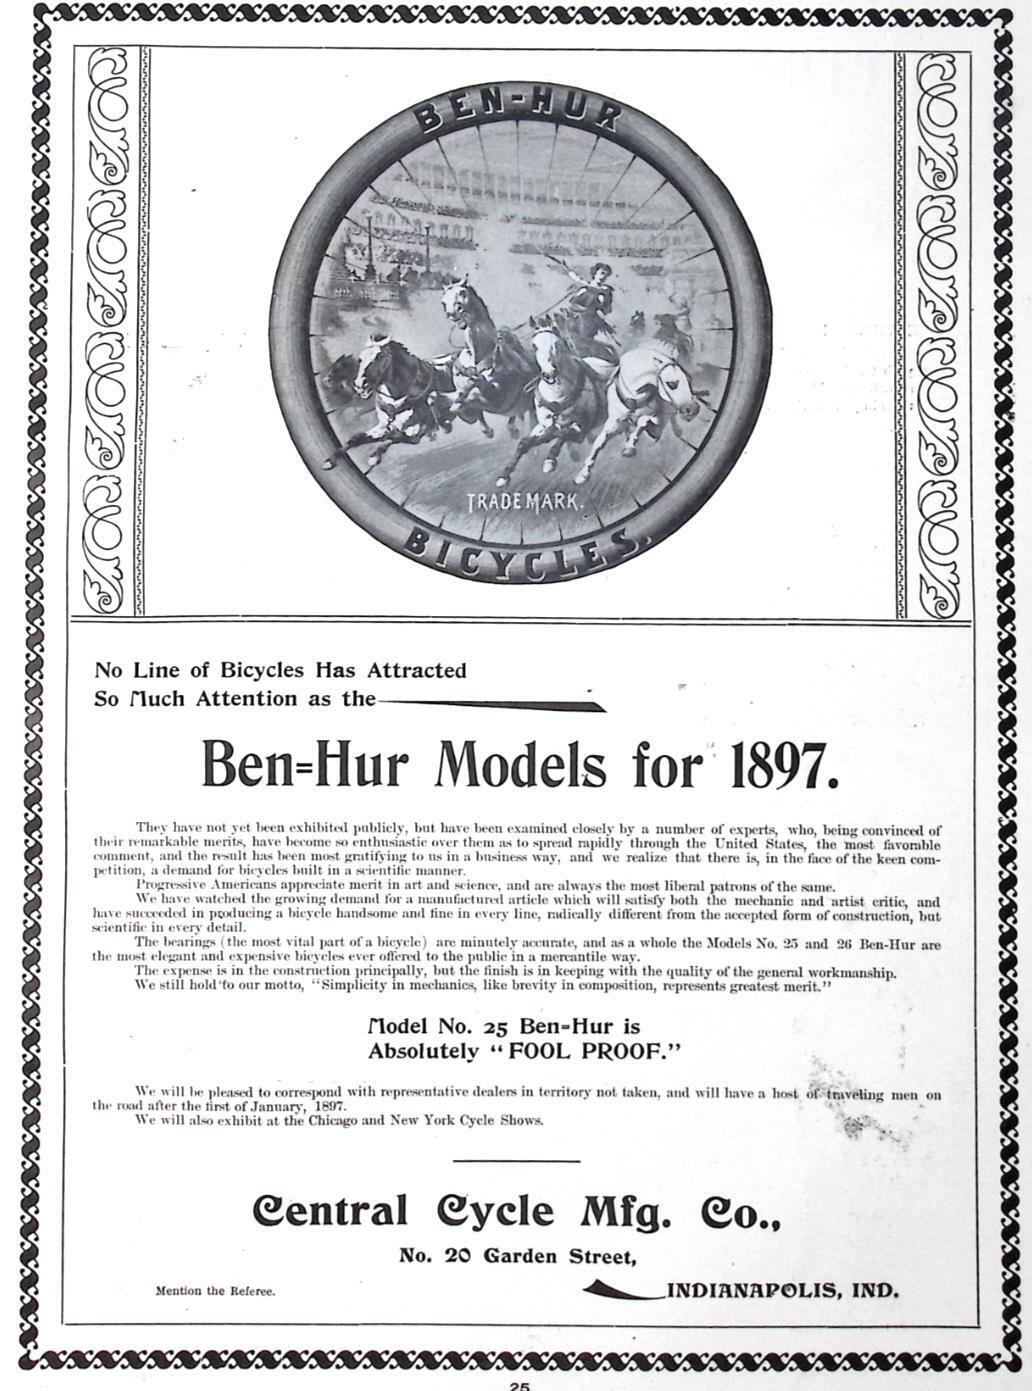 1896 Ben Hur Bicycles Model 25 FOOL PROOF 1897 Central Cycle Co Dealer Print Ad